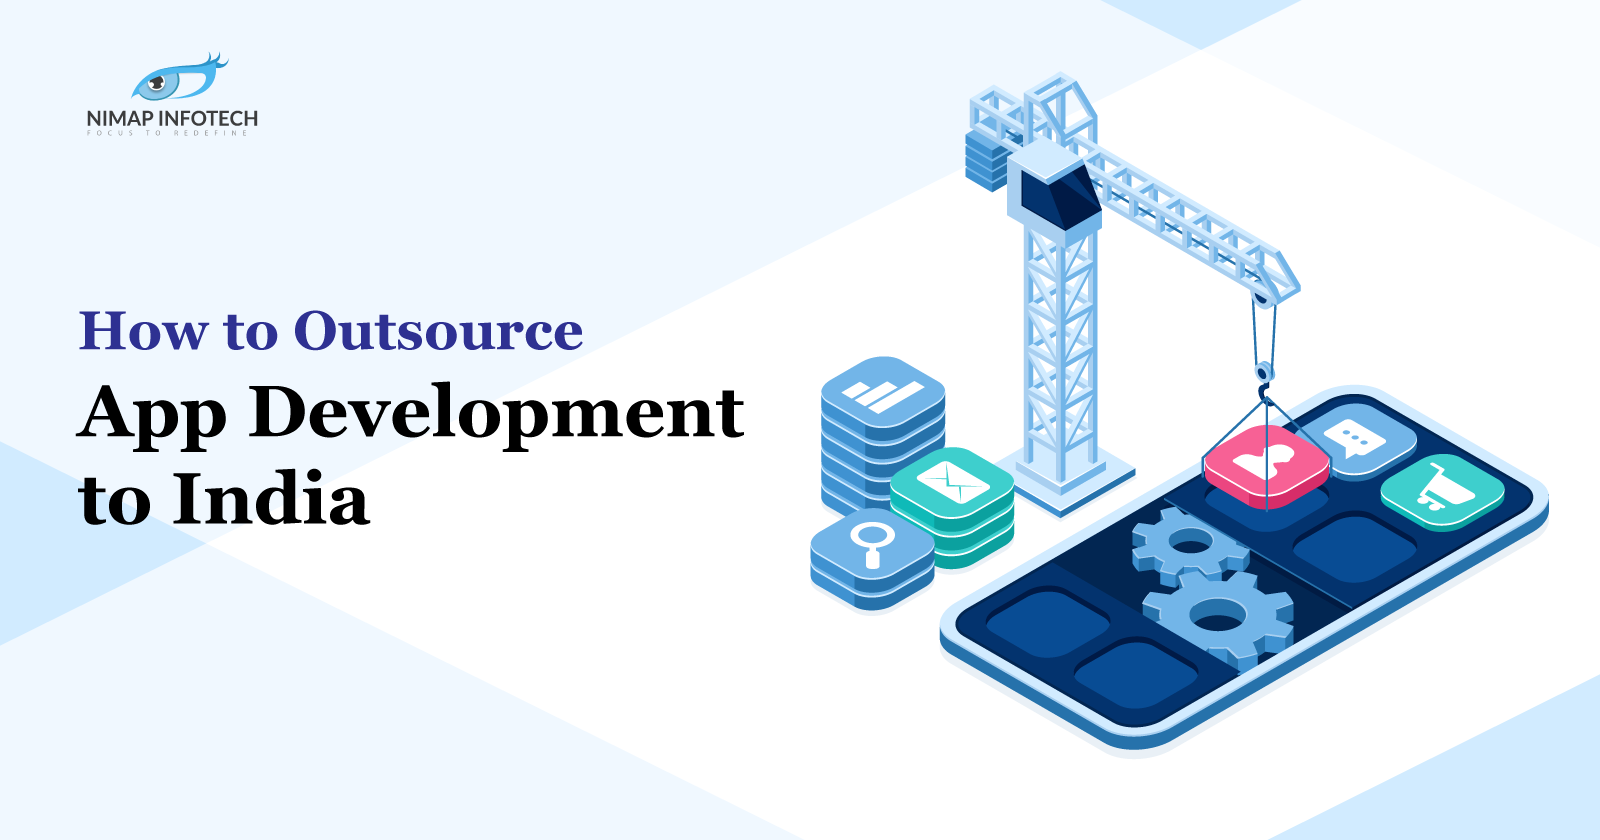 How to Outsource App Development to India?